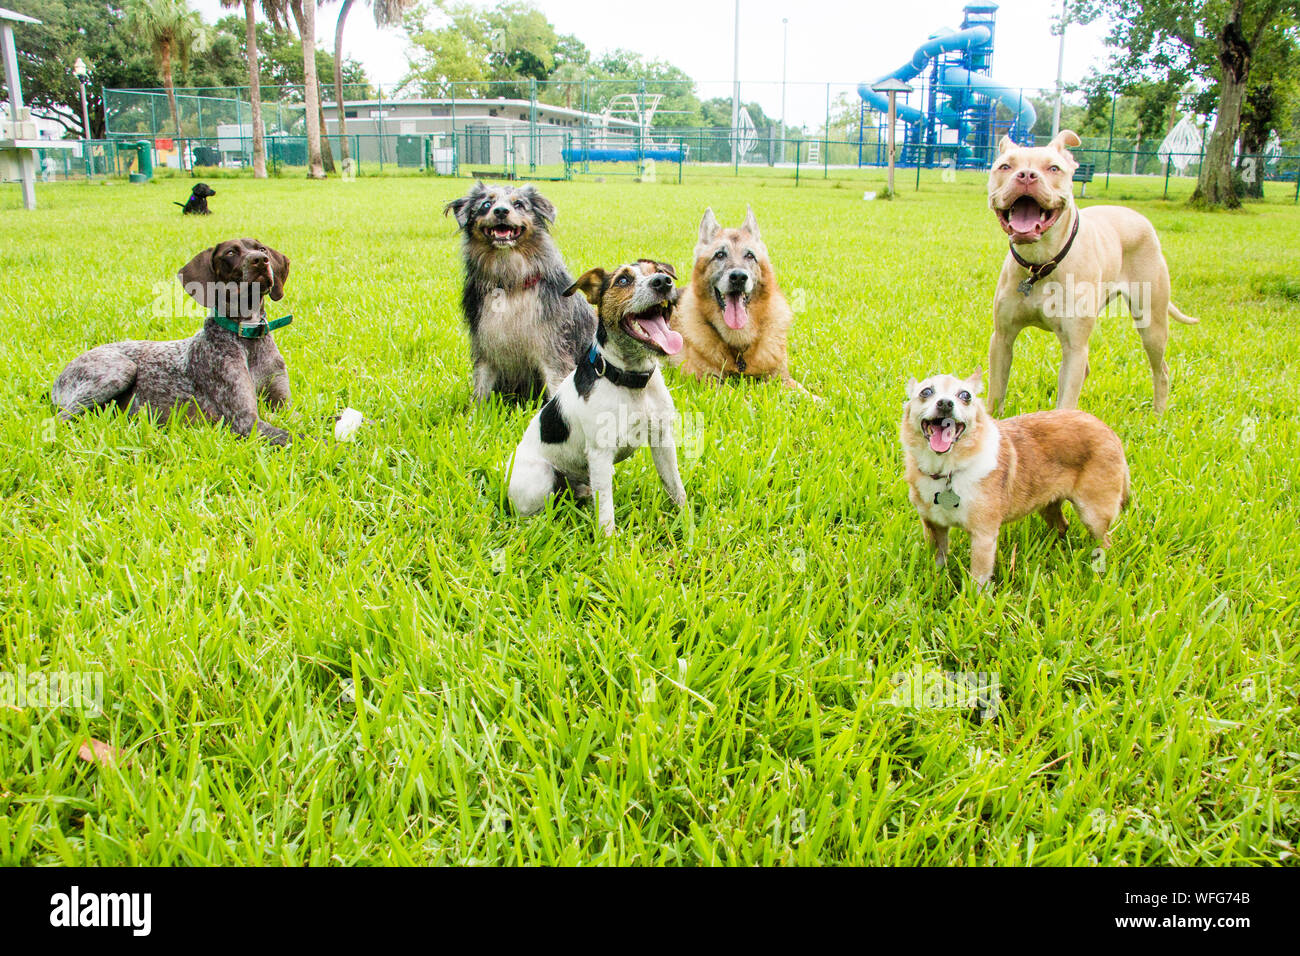 Six dogs in a dog park, United States Stock Photo